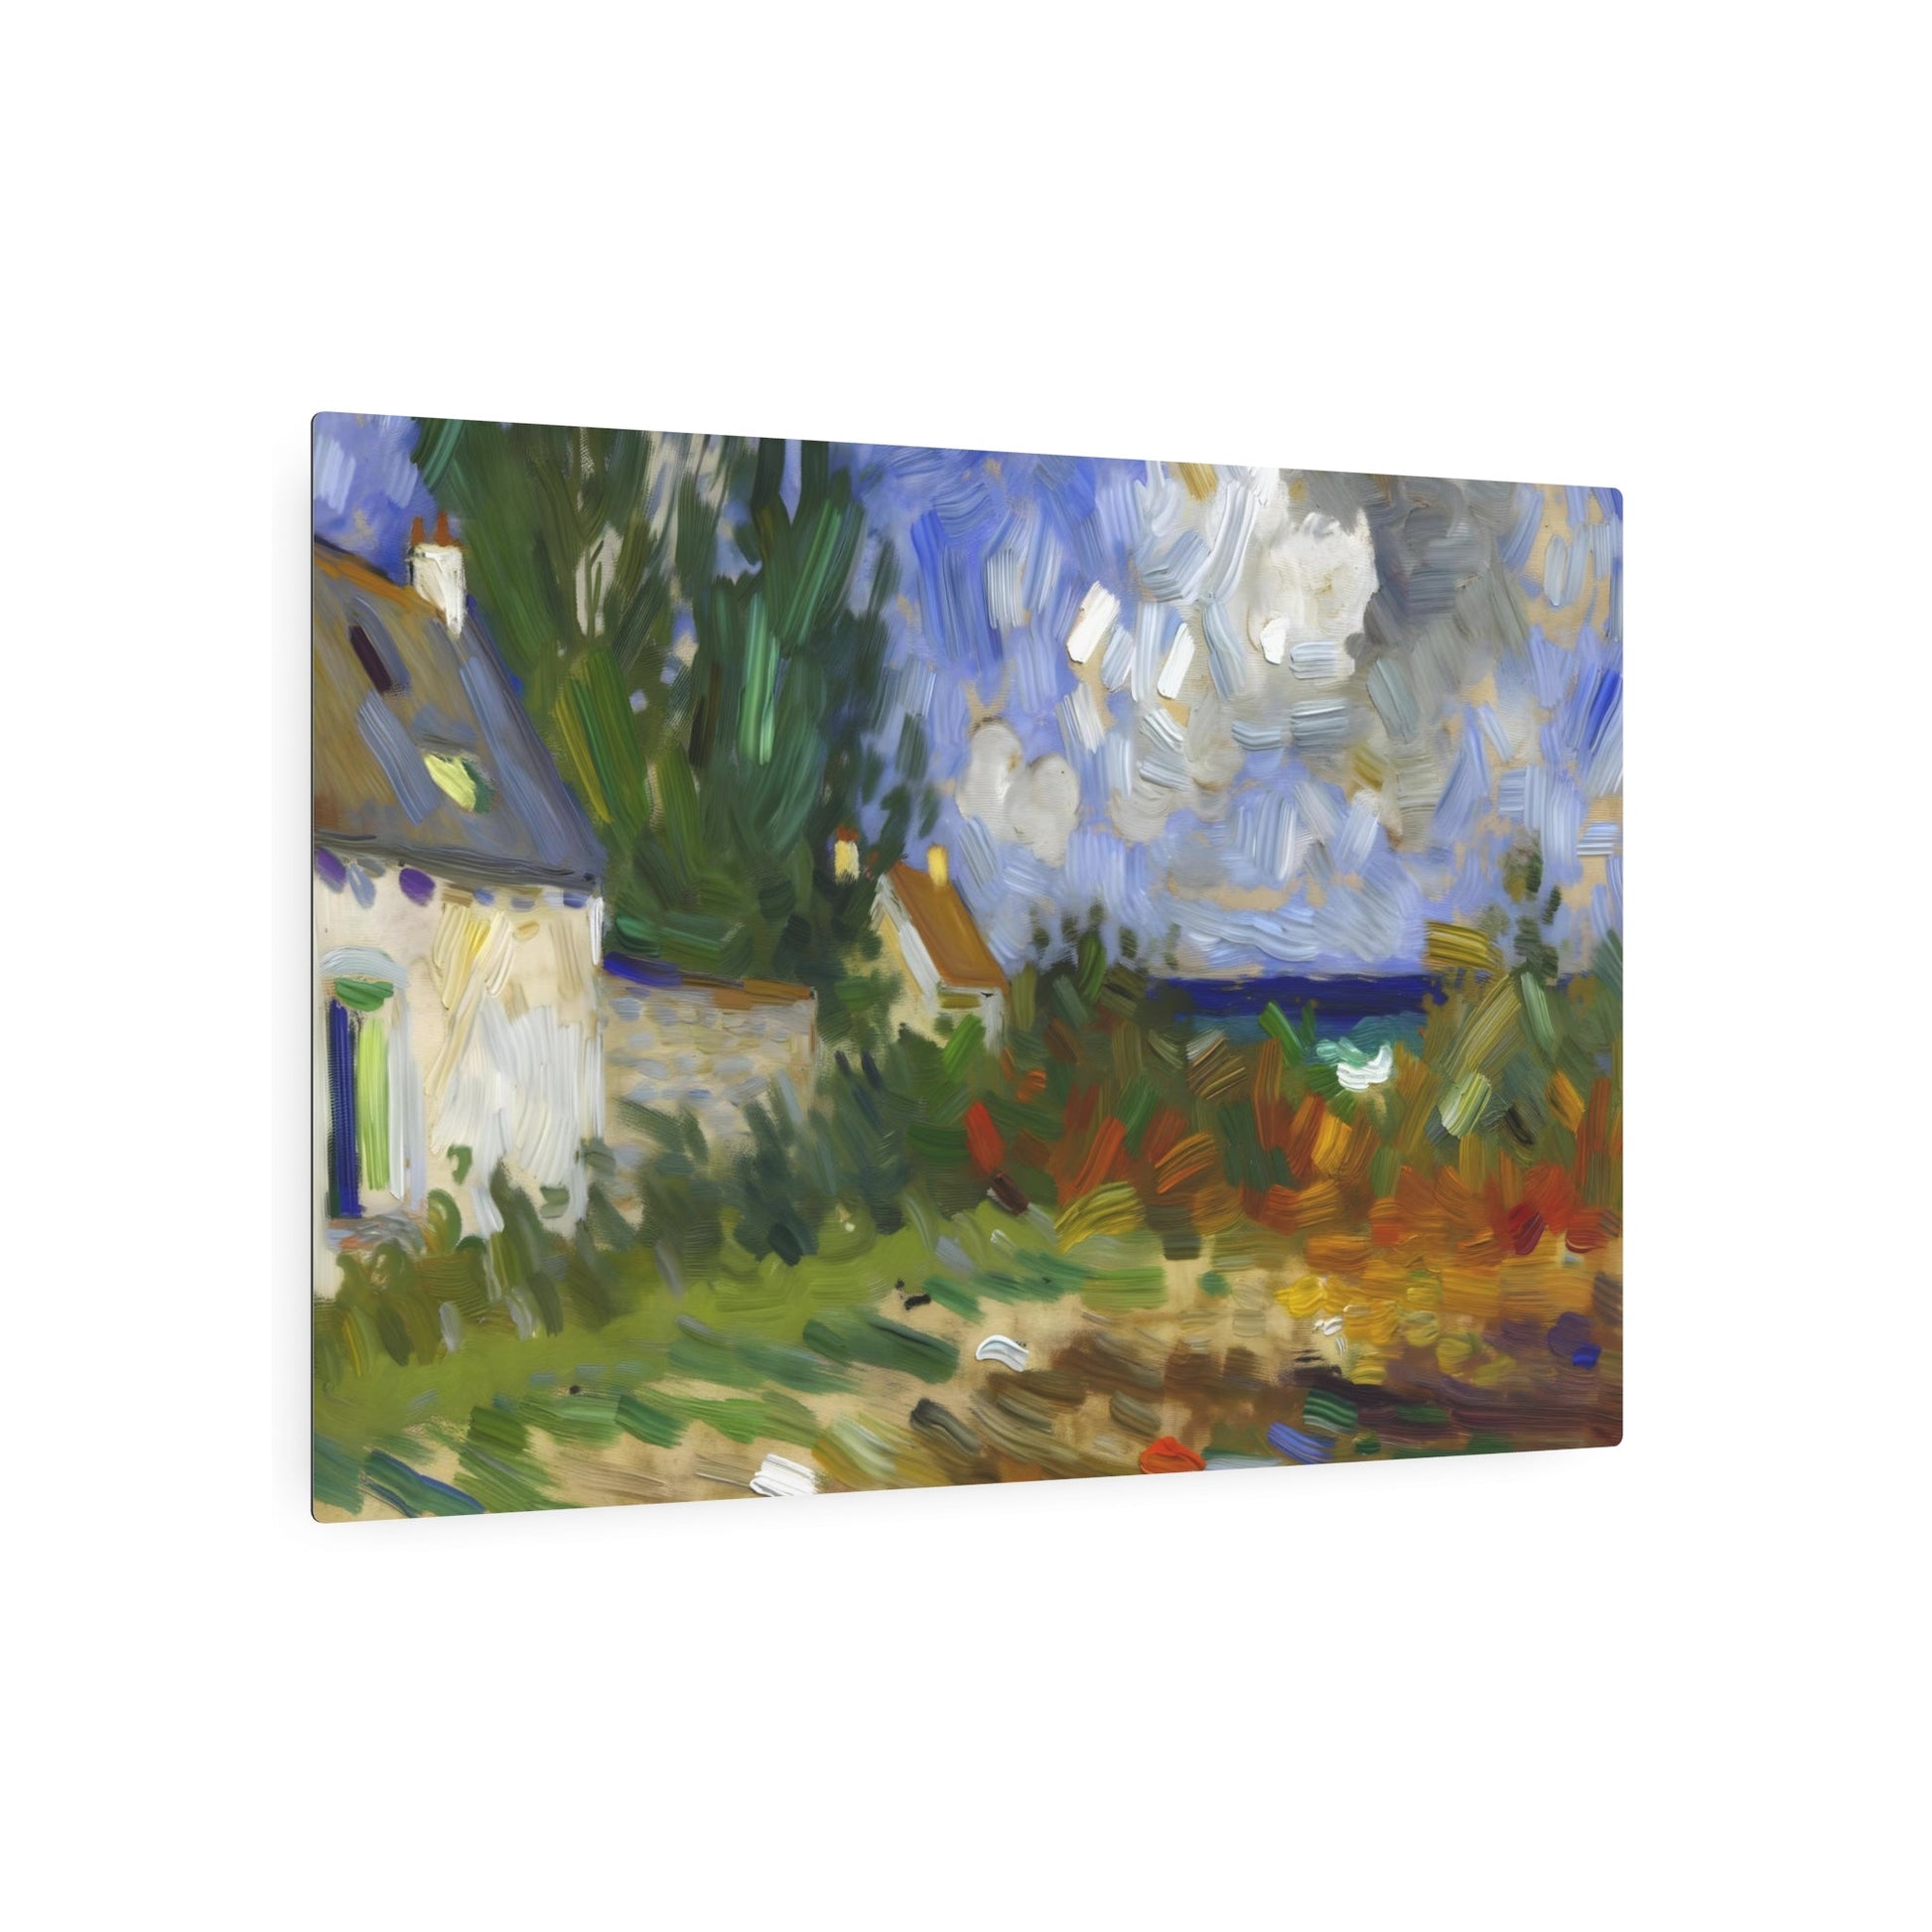 Metal Poster Art | "Impressionism-Inspired Artwork: Vivid Color Display with Emphasized Changing Light Qualities - Western Art Styles" - Metal Poster Art 36″ x 24″ (Horizontal) 0.12''